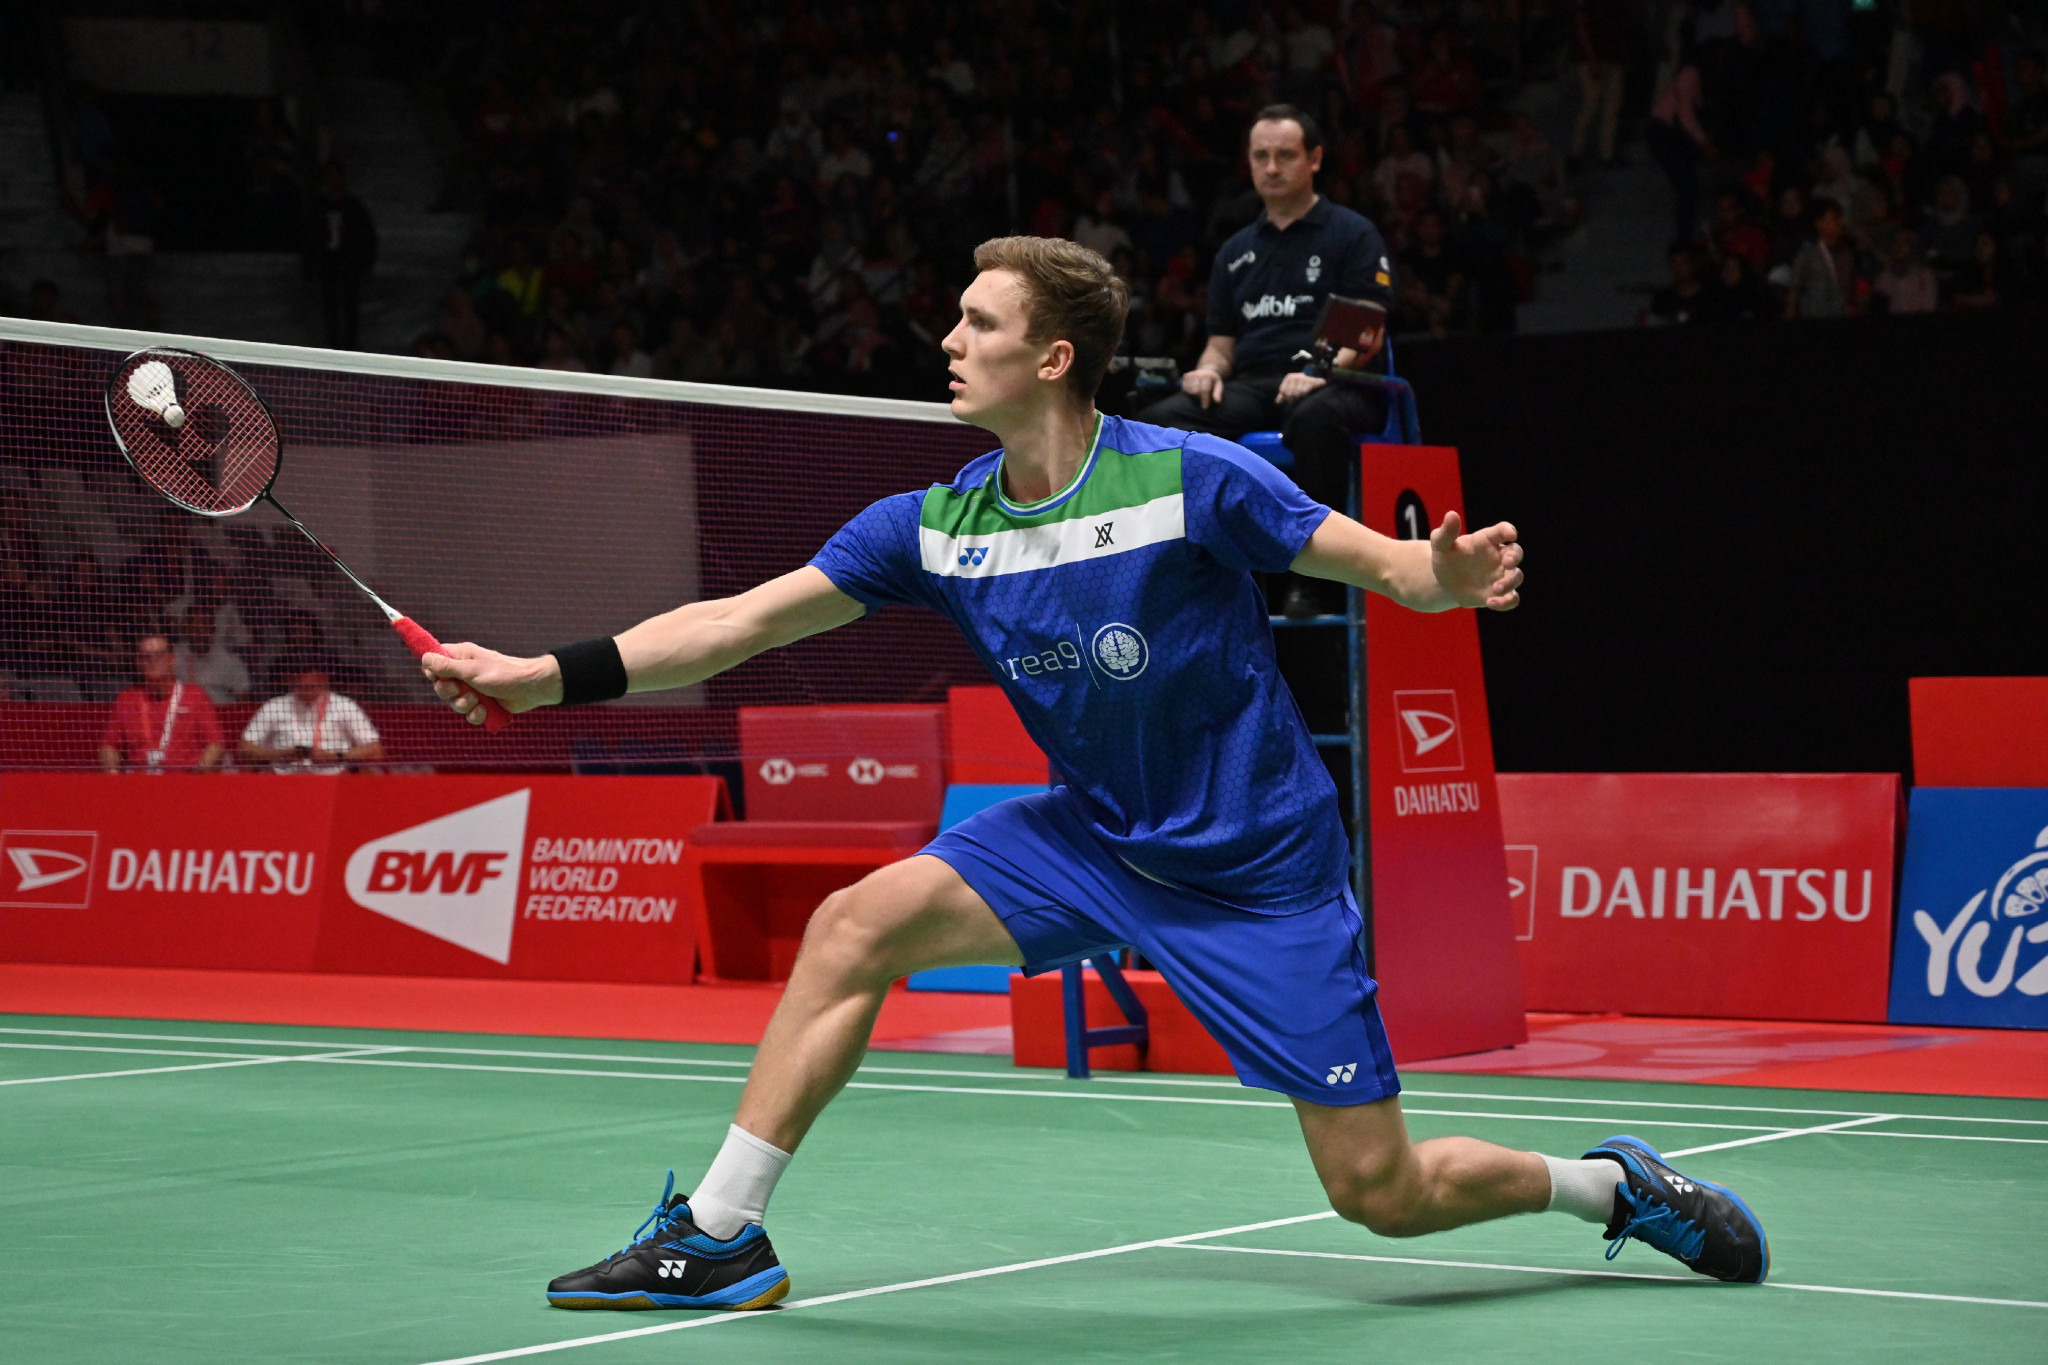 Viktor Axelsen helped Denmark continue their winning streak at the event ©Getty Images